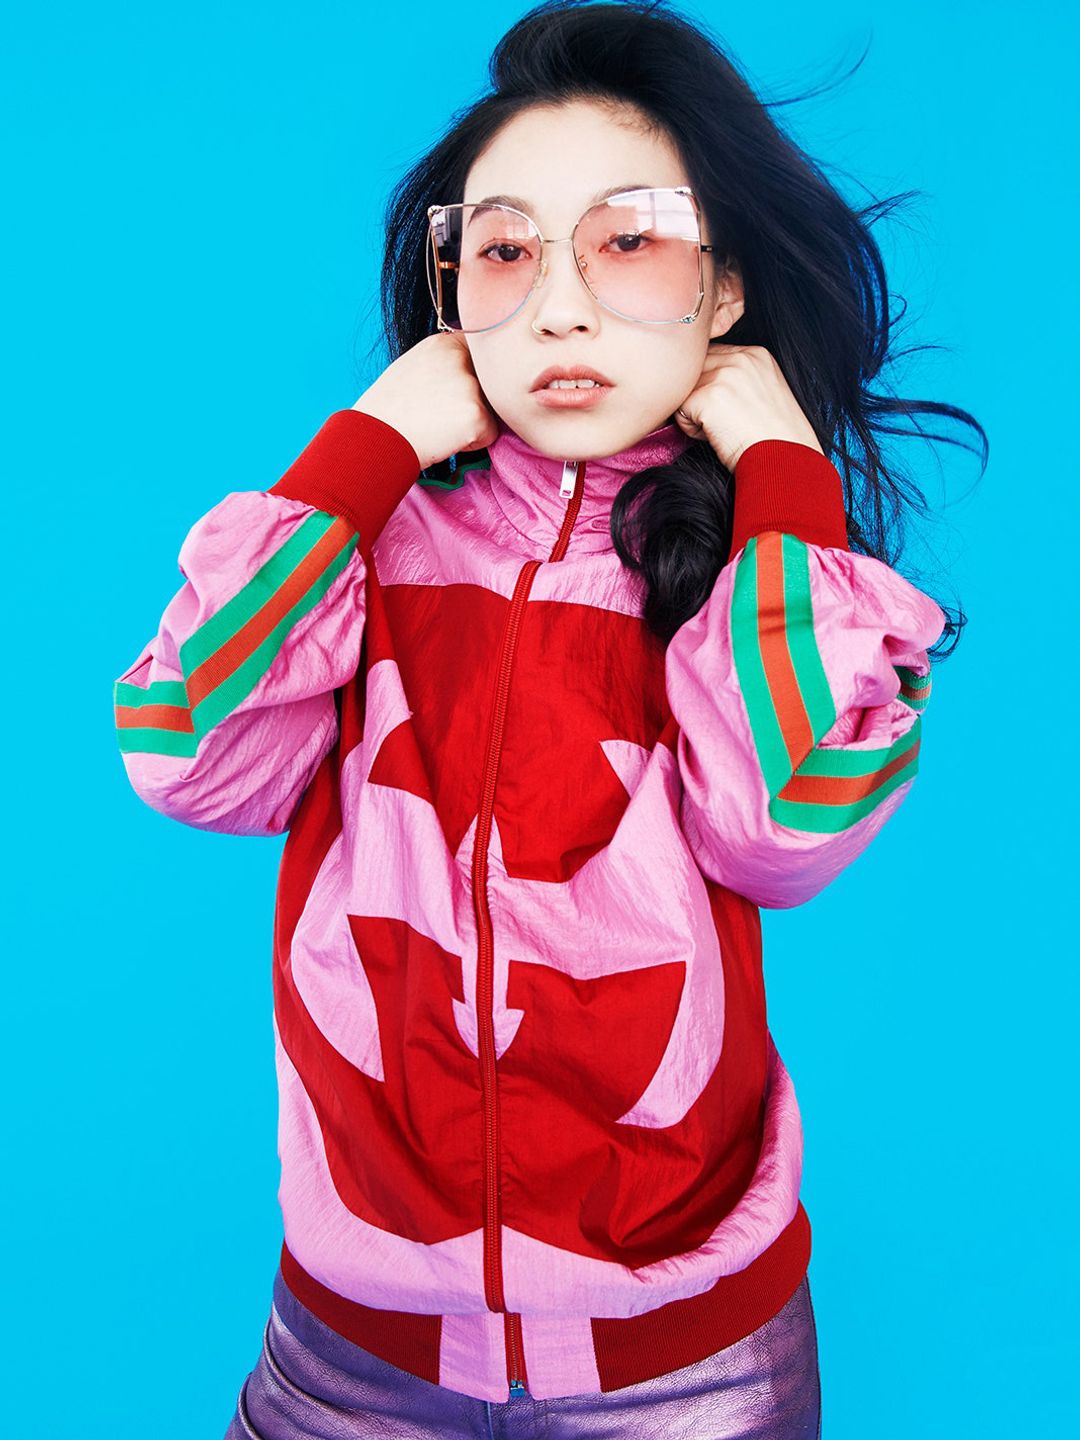 Awkwafina in her youth